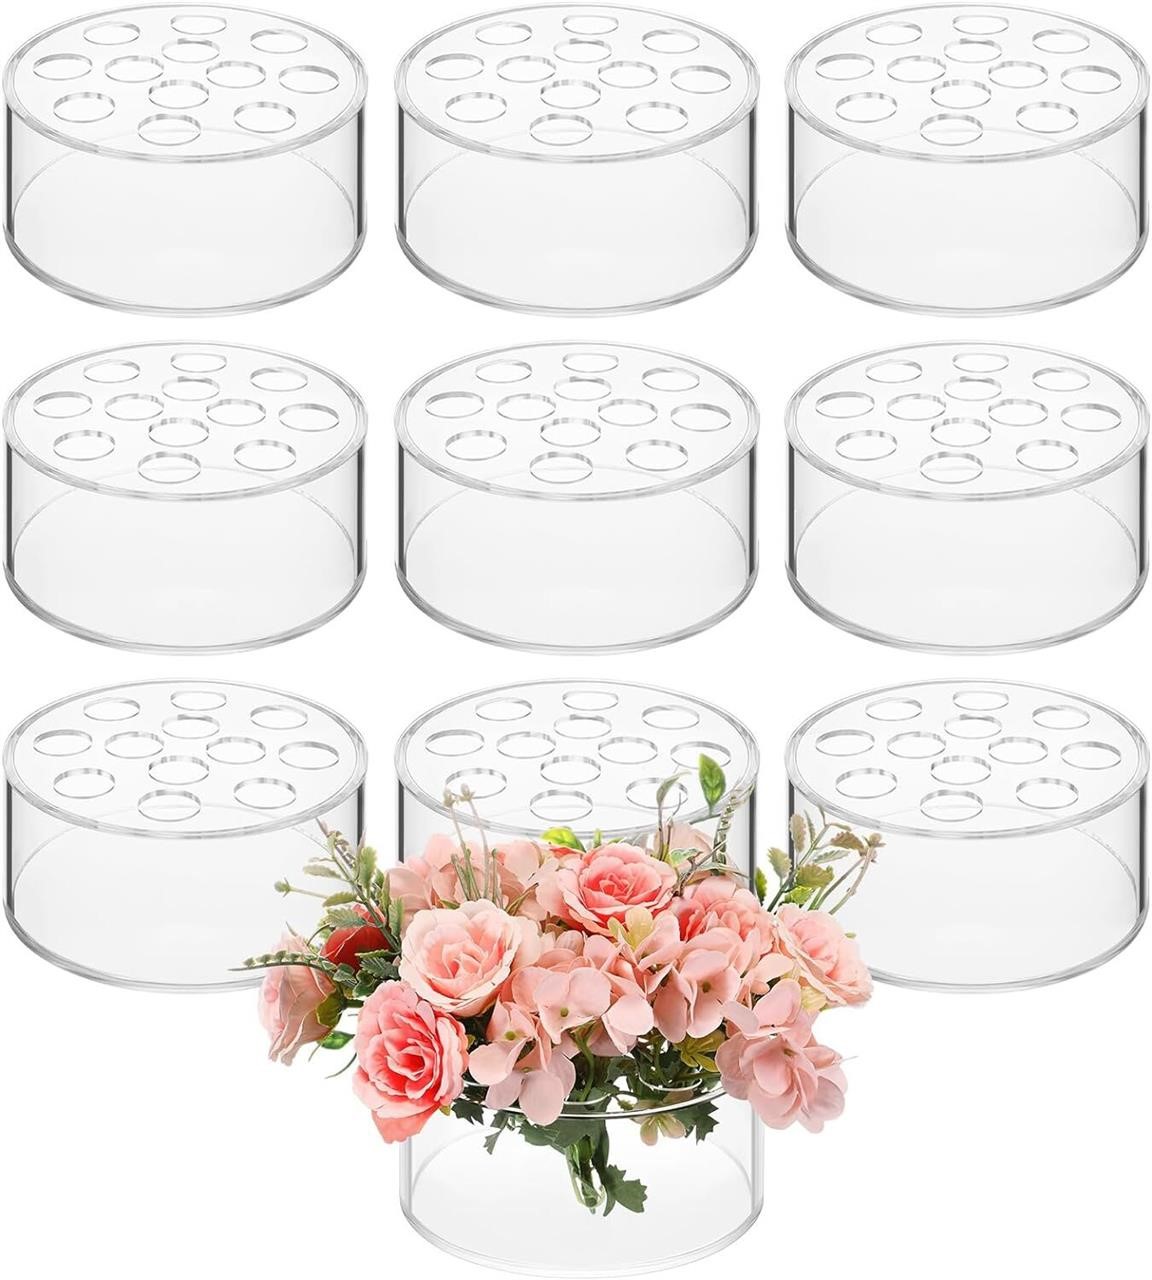 10 pack-Tanlade Acrylic Floral Vase  Clear